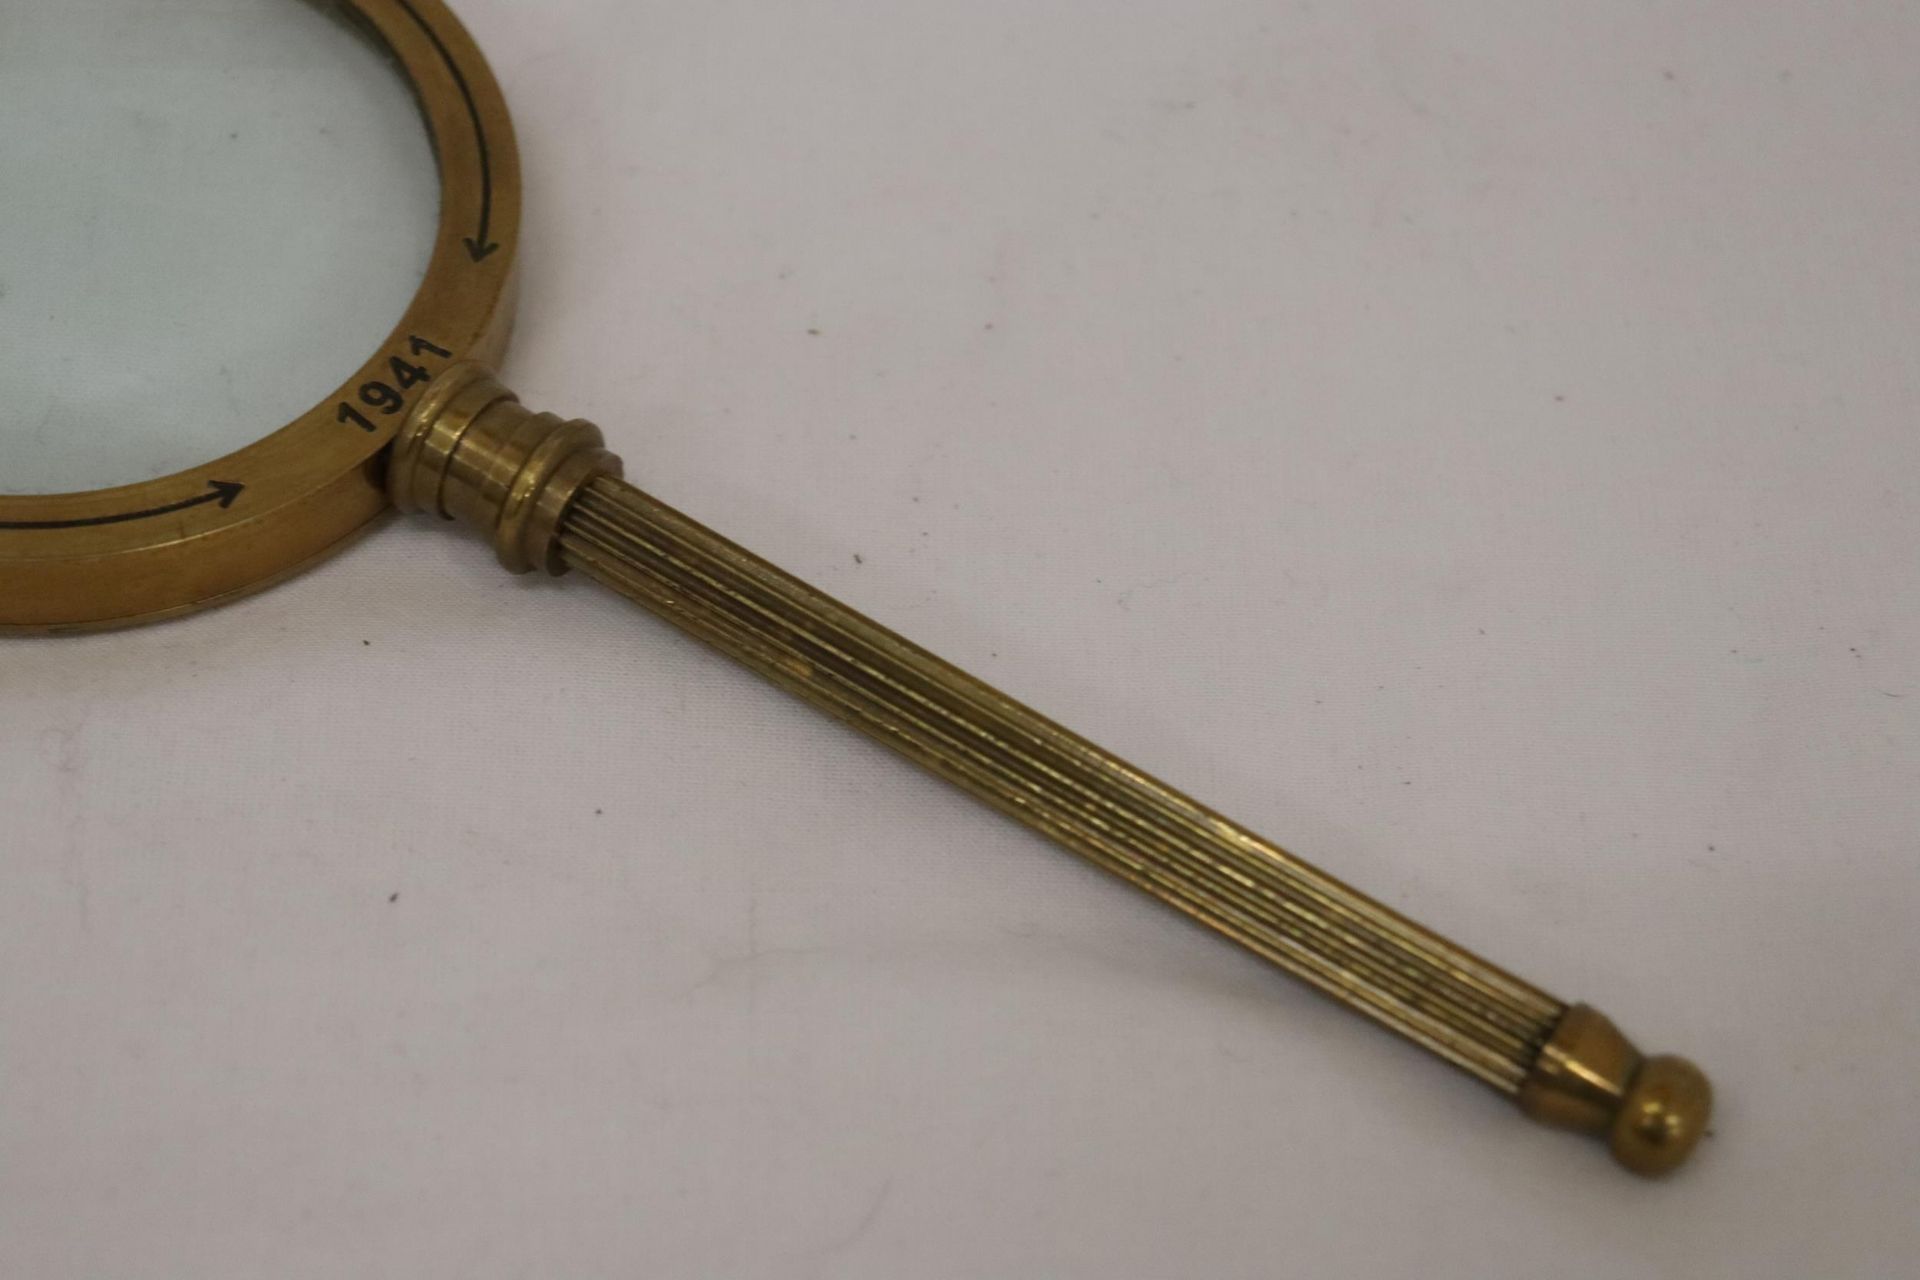 A HANDMADE VINTAGE ANTIQUE HENRY HUGHES & SONS OF LONDON 1941 BRASS MAGNIFYING GLASS - Image 3 of 5